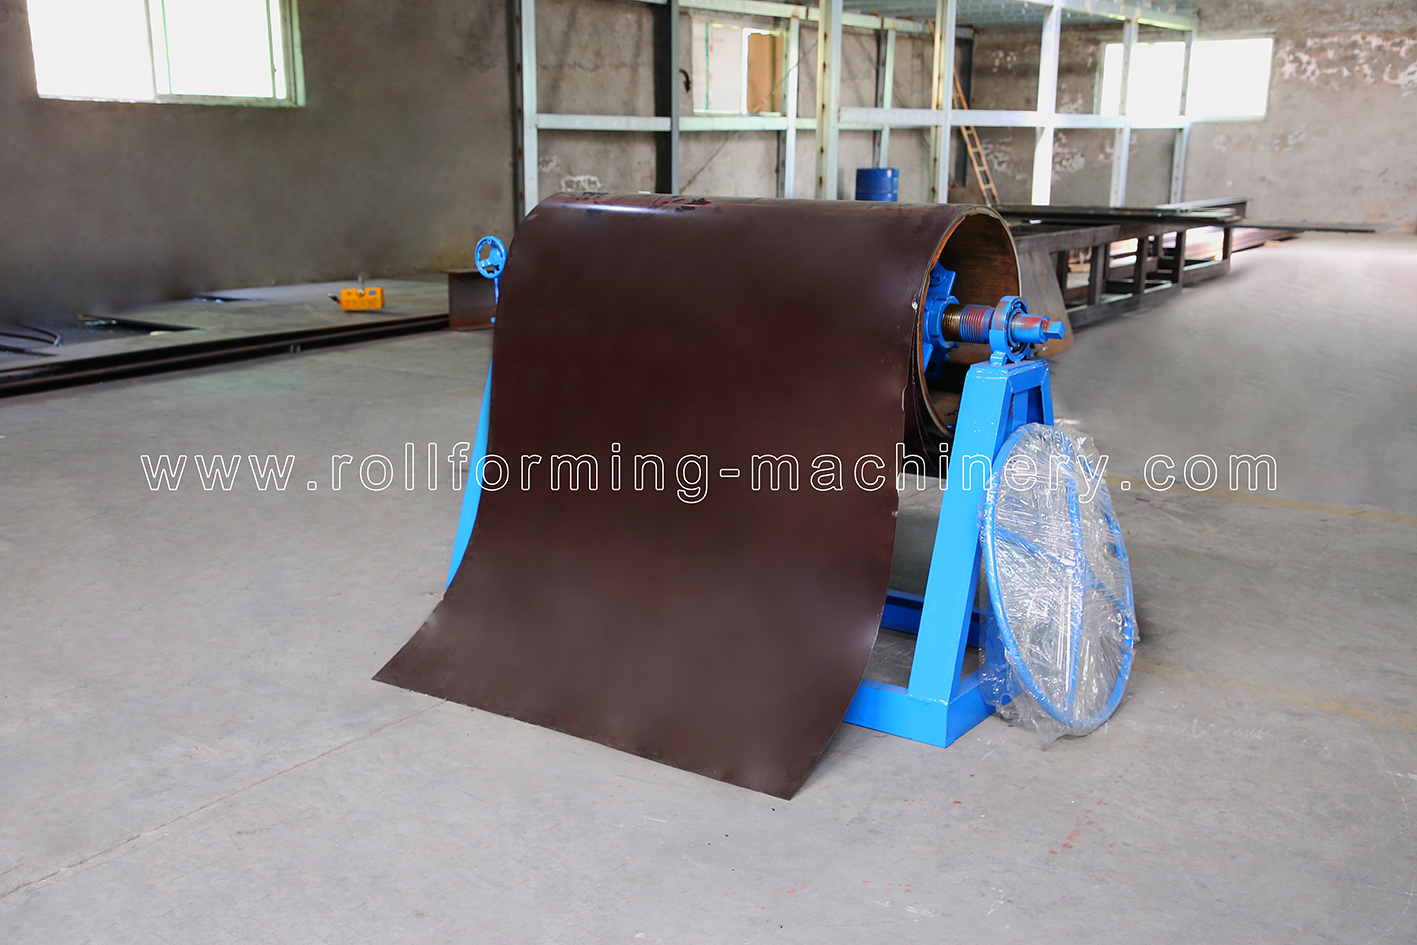  Double Layer Tile Roof Roll Forming Machine